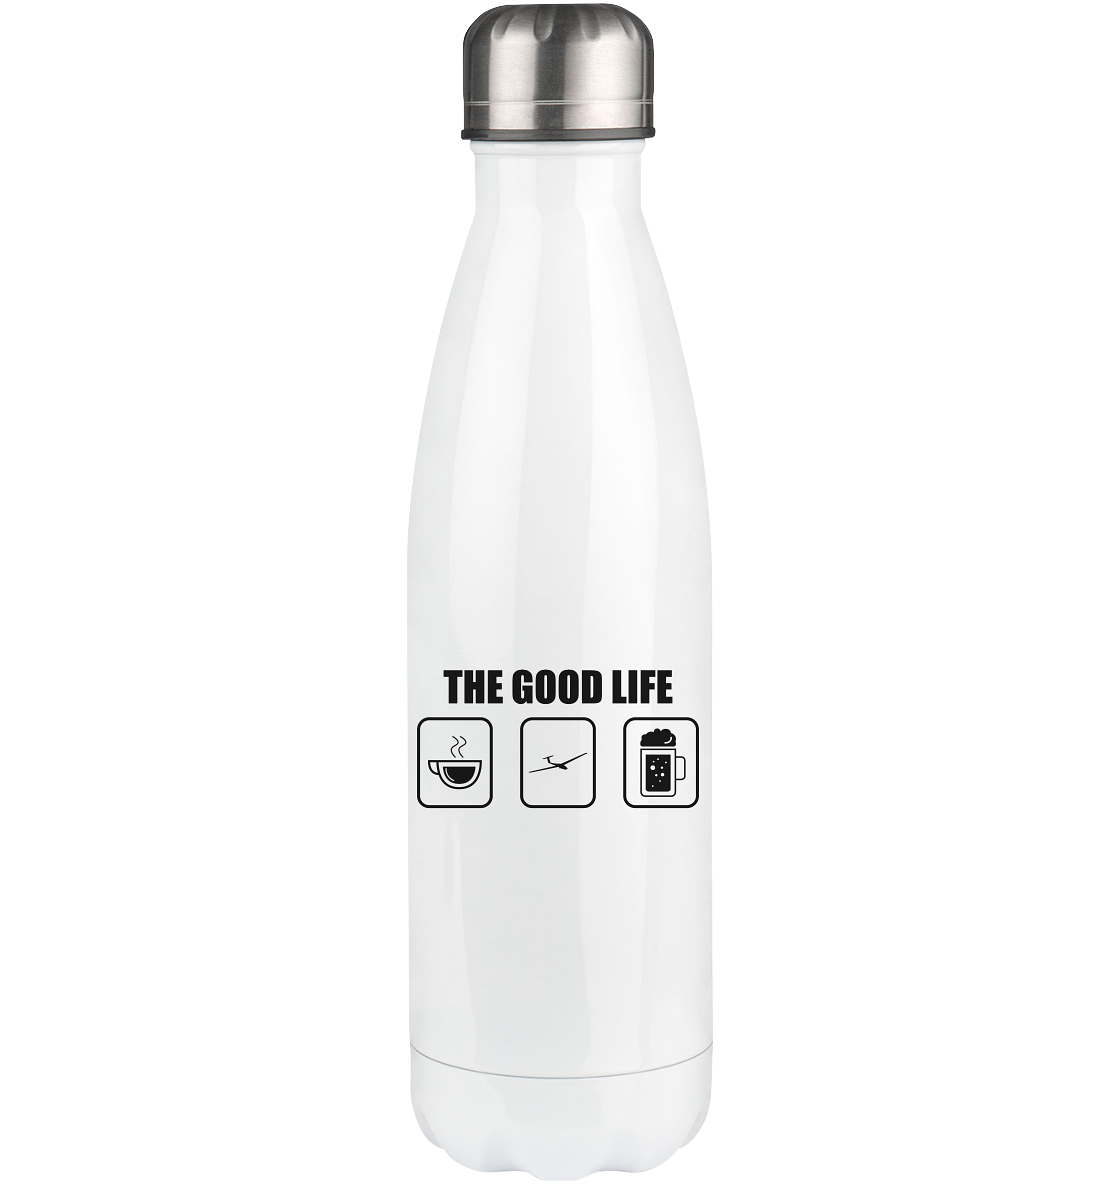 The Good Life 2 - Edelstahl Thermosflasche berge 500ml